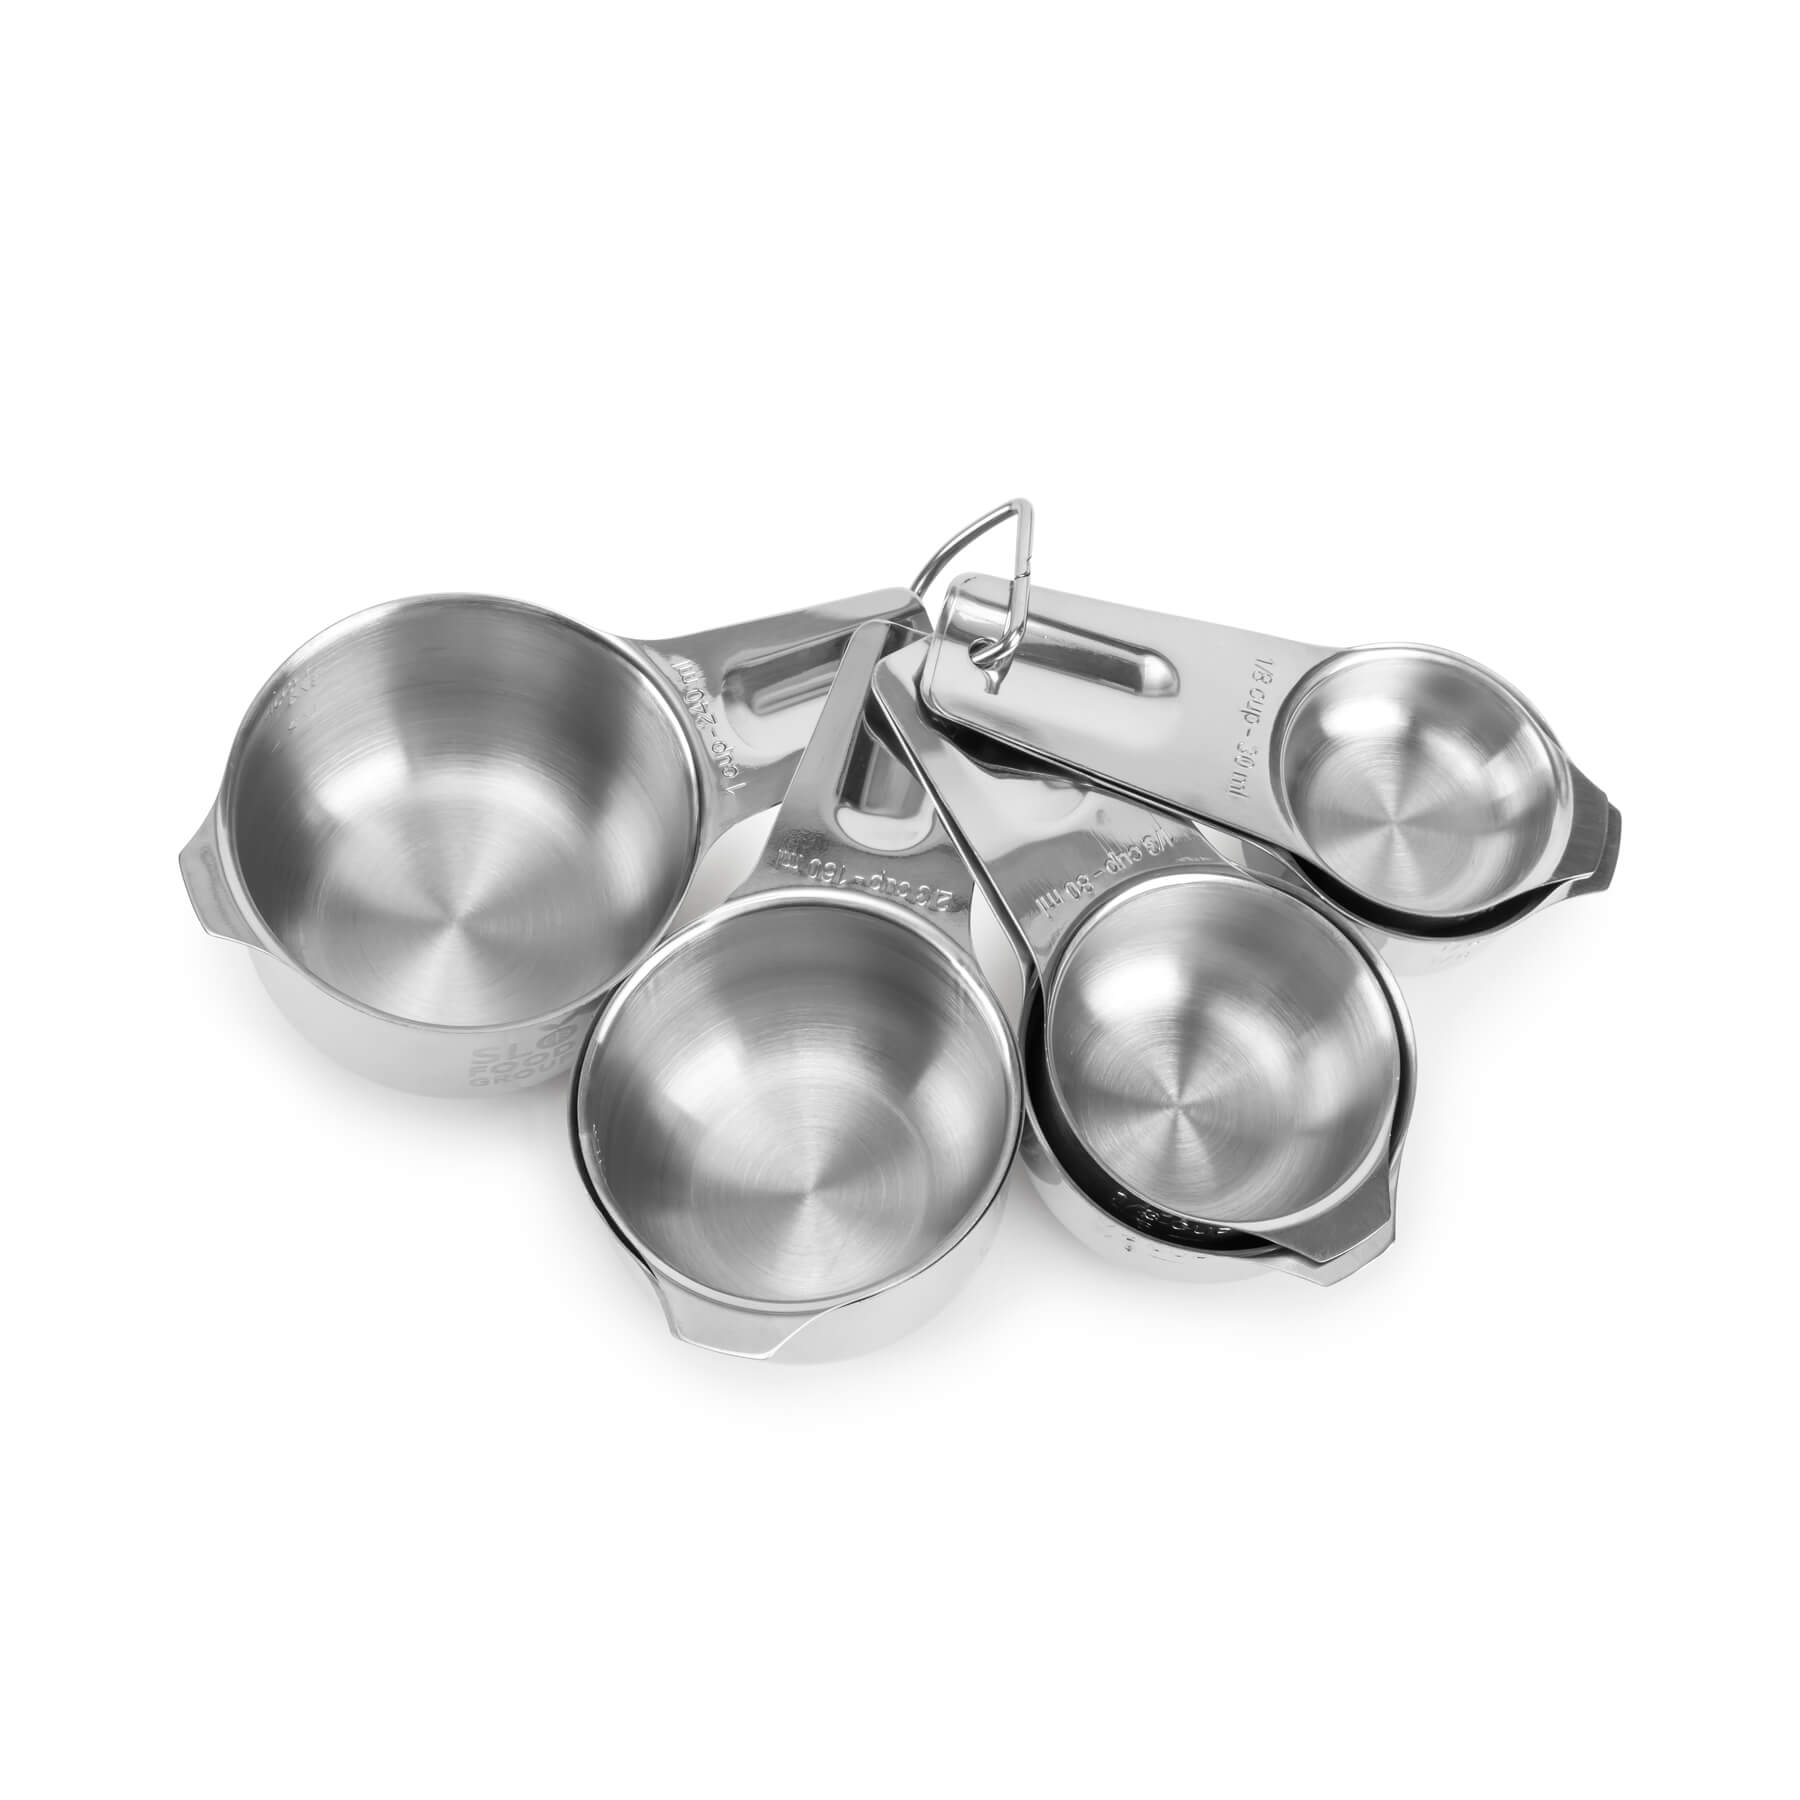 6/10 Piece Measuring Cups Kitchen Measuring Spoons Set Stainless Steel  Measuring Cup Spoon for Baking Cooking Measuring Tools